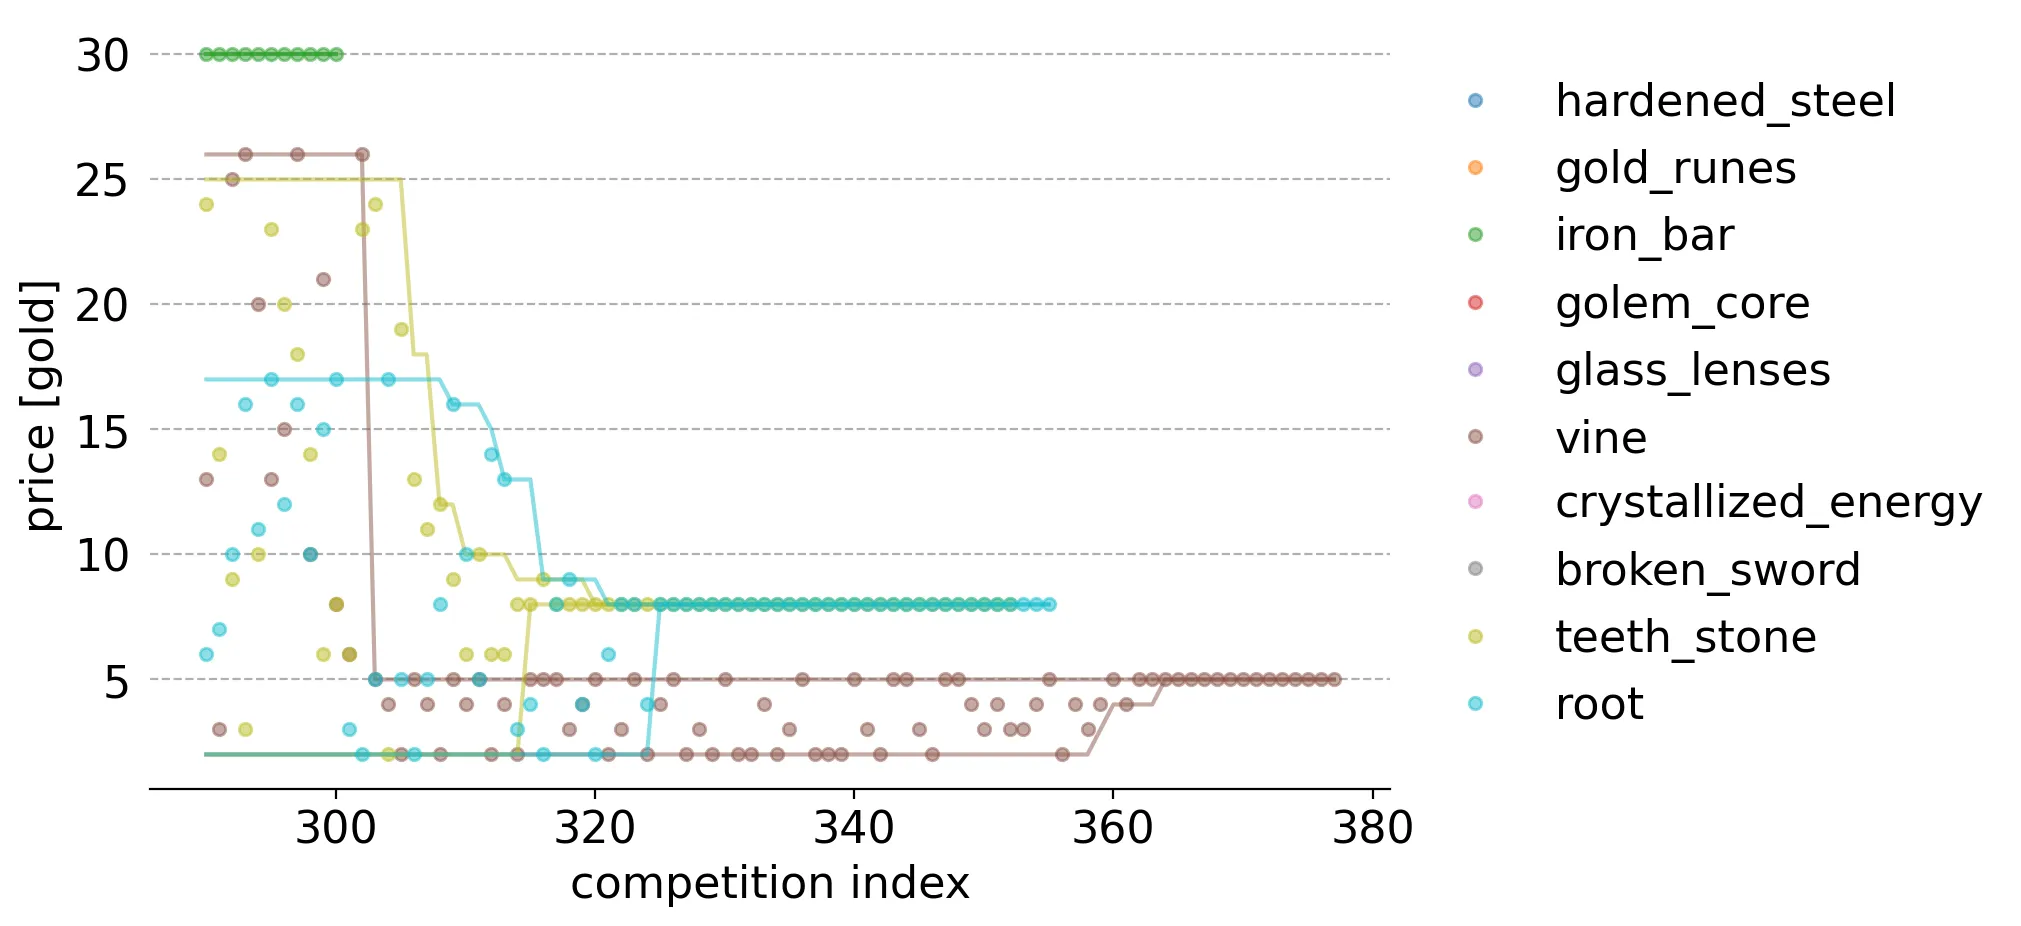 
    Shows the price (y-axis value) of each item (color) randomly chosen between its lower and upper
    ideal price bound range for that competition (index is x-value).
    Said bound ranges are shown as lines.
    Competions 290 to 380, roughly corresponding to customer reactions 225 until the last.
    Includes instances when a competition was required to replace items on shelves
    with prices outside of its current price bounds, hence the higher competiton index range.
    Shows how a reaction to a vine item narrows the algorithm's understanding of its ideal price
    range, making it completely unable to compete with teeth stone or root items in the Thompson
    sampling process.
    A narrower range occurs for teeth stone randomly, allowing it to outcompete the root item
    resulting in only its sale.
    Eventually, the algorithm identifies root as having the same ideal price as teeth stone,
    resulting in both being chosen for shelves at random until both are sold off.
    Finally, the vine items ideal price is identified and it is sold off.